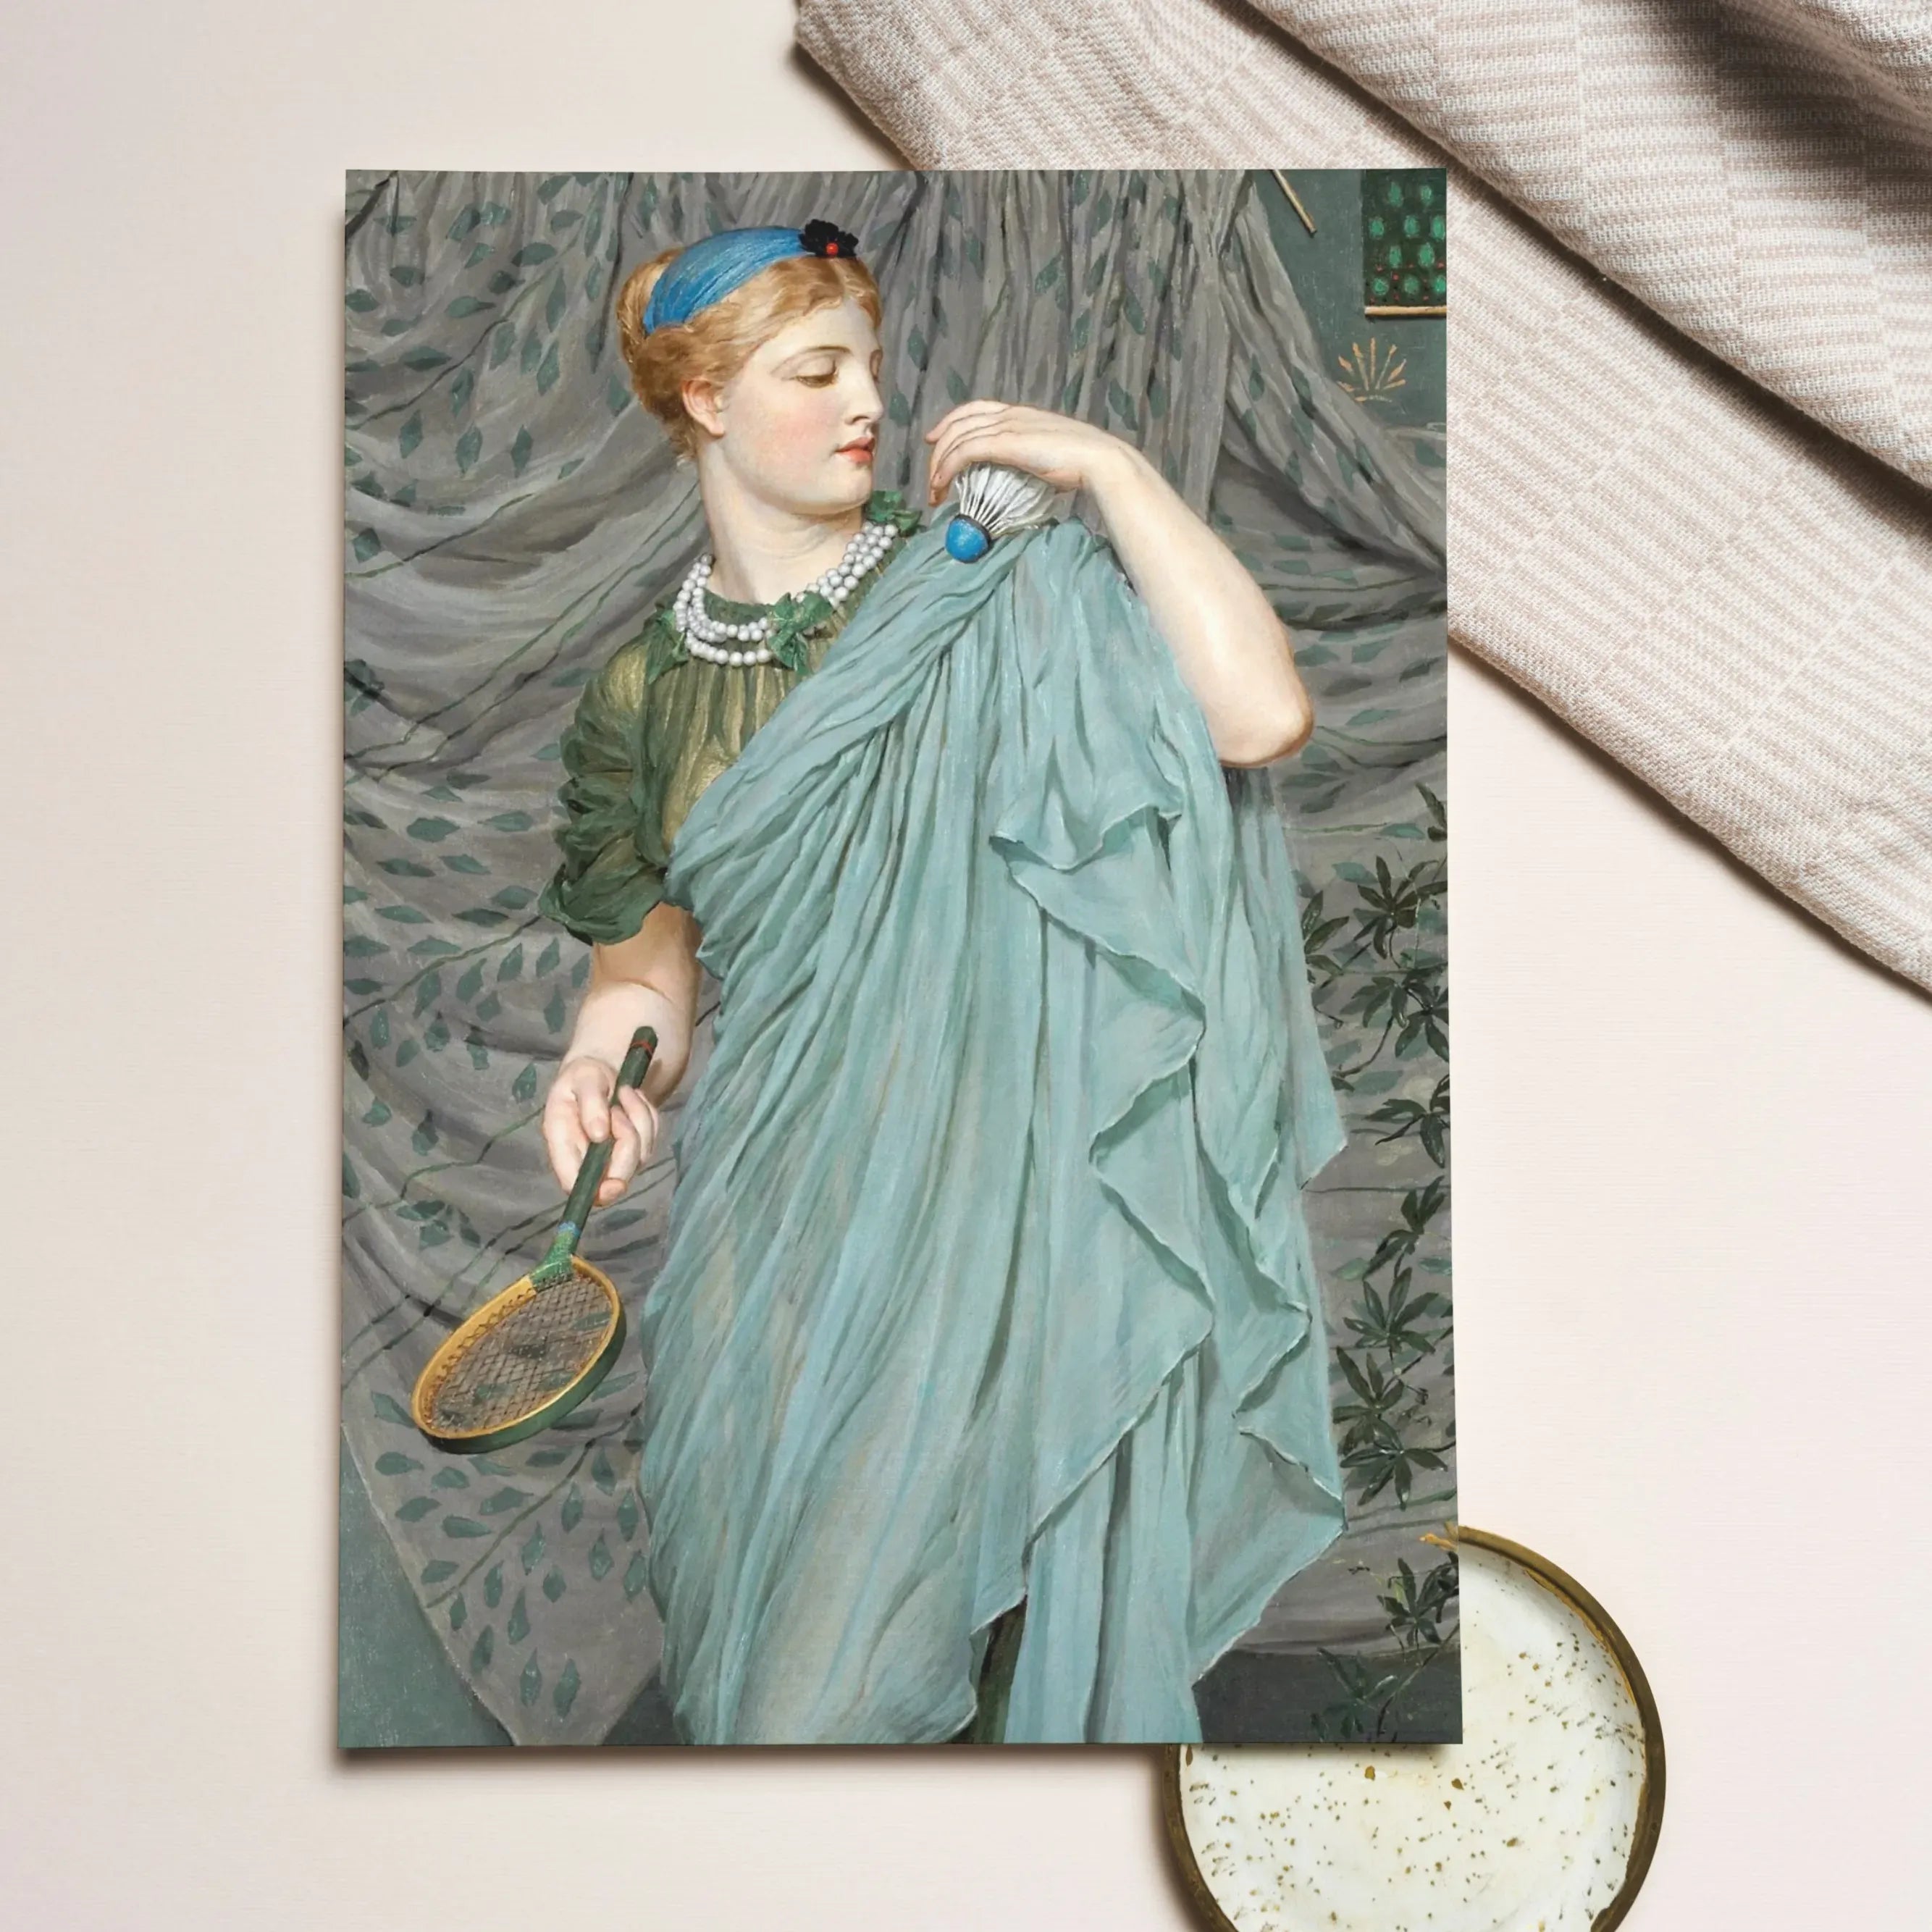 Battledore By Albert Joseph Moore Greeting Card - A5 Portrait / 1 Card - Greeting & Note Cards - Aesthetic Art